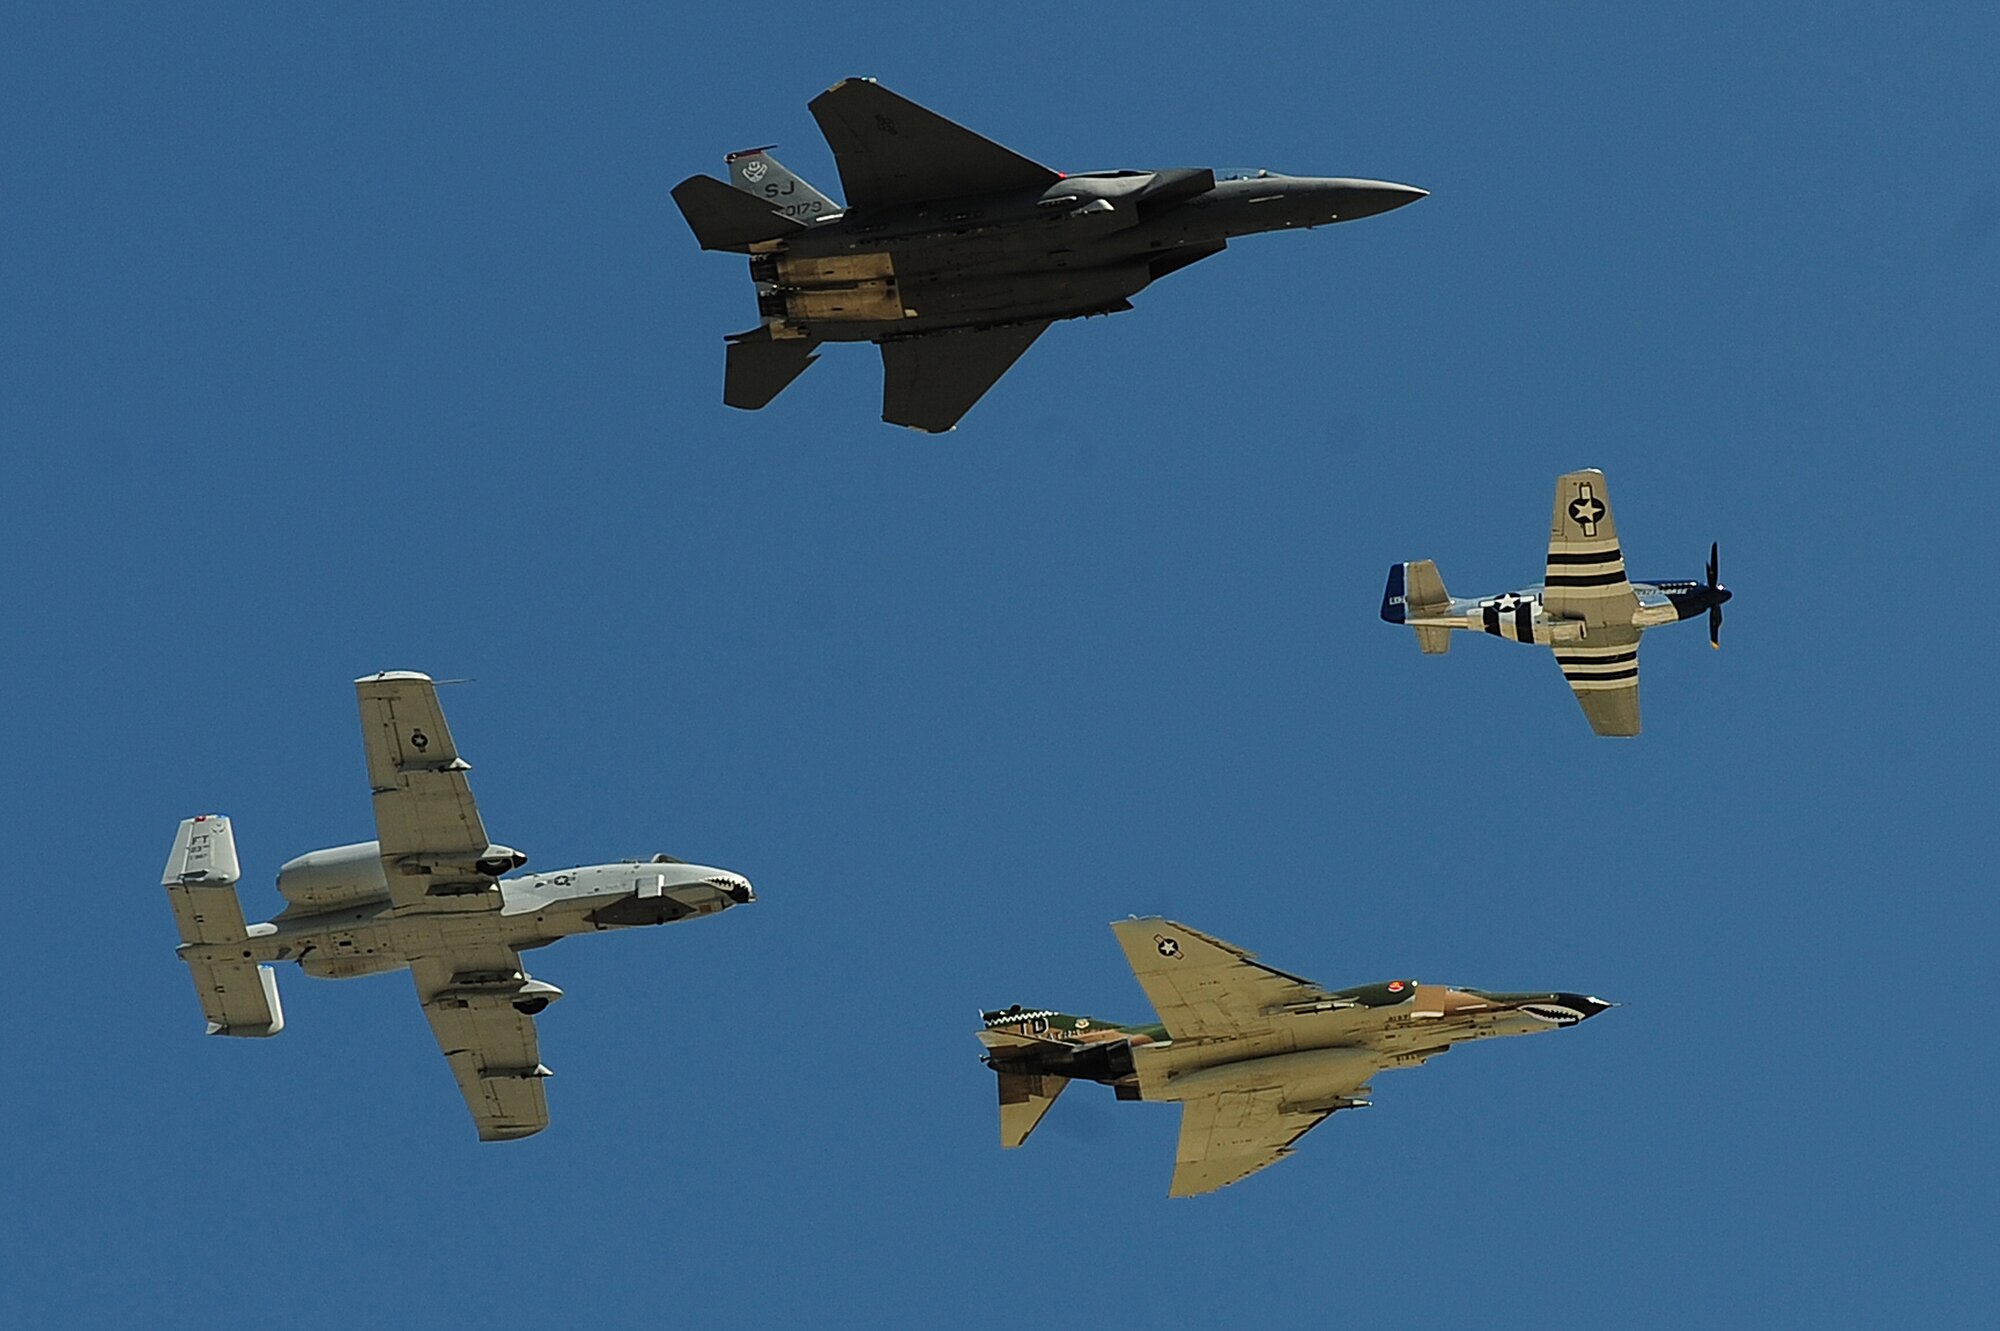 SEYMOUR JOHNSON AIR FORCE BASE, N.C. -- (Clockwise) An F-15E Strike Eagle, P-51 Mustang, F-4 Phantom and A-10 Thunderbolt II perform a heritage flight during the Wings Over Wayne Air Show and Open House here, April 17, 2011. Each of these aircraft have been assigned to the 4th Fighter Wing throughout the years. (U.S. Air Force photo/Senior Airman Rae Perry) (RELEASED)